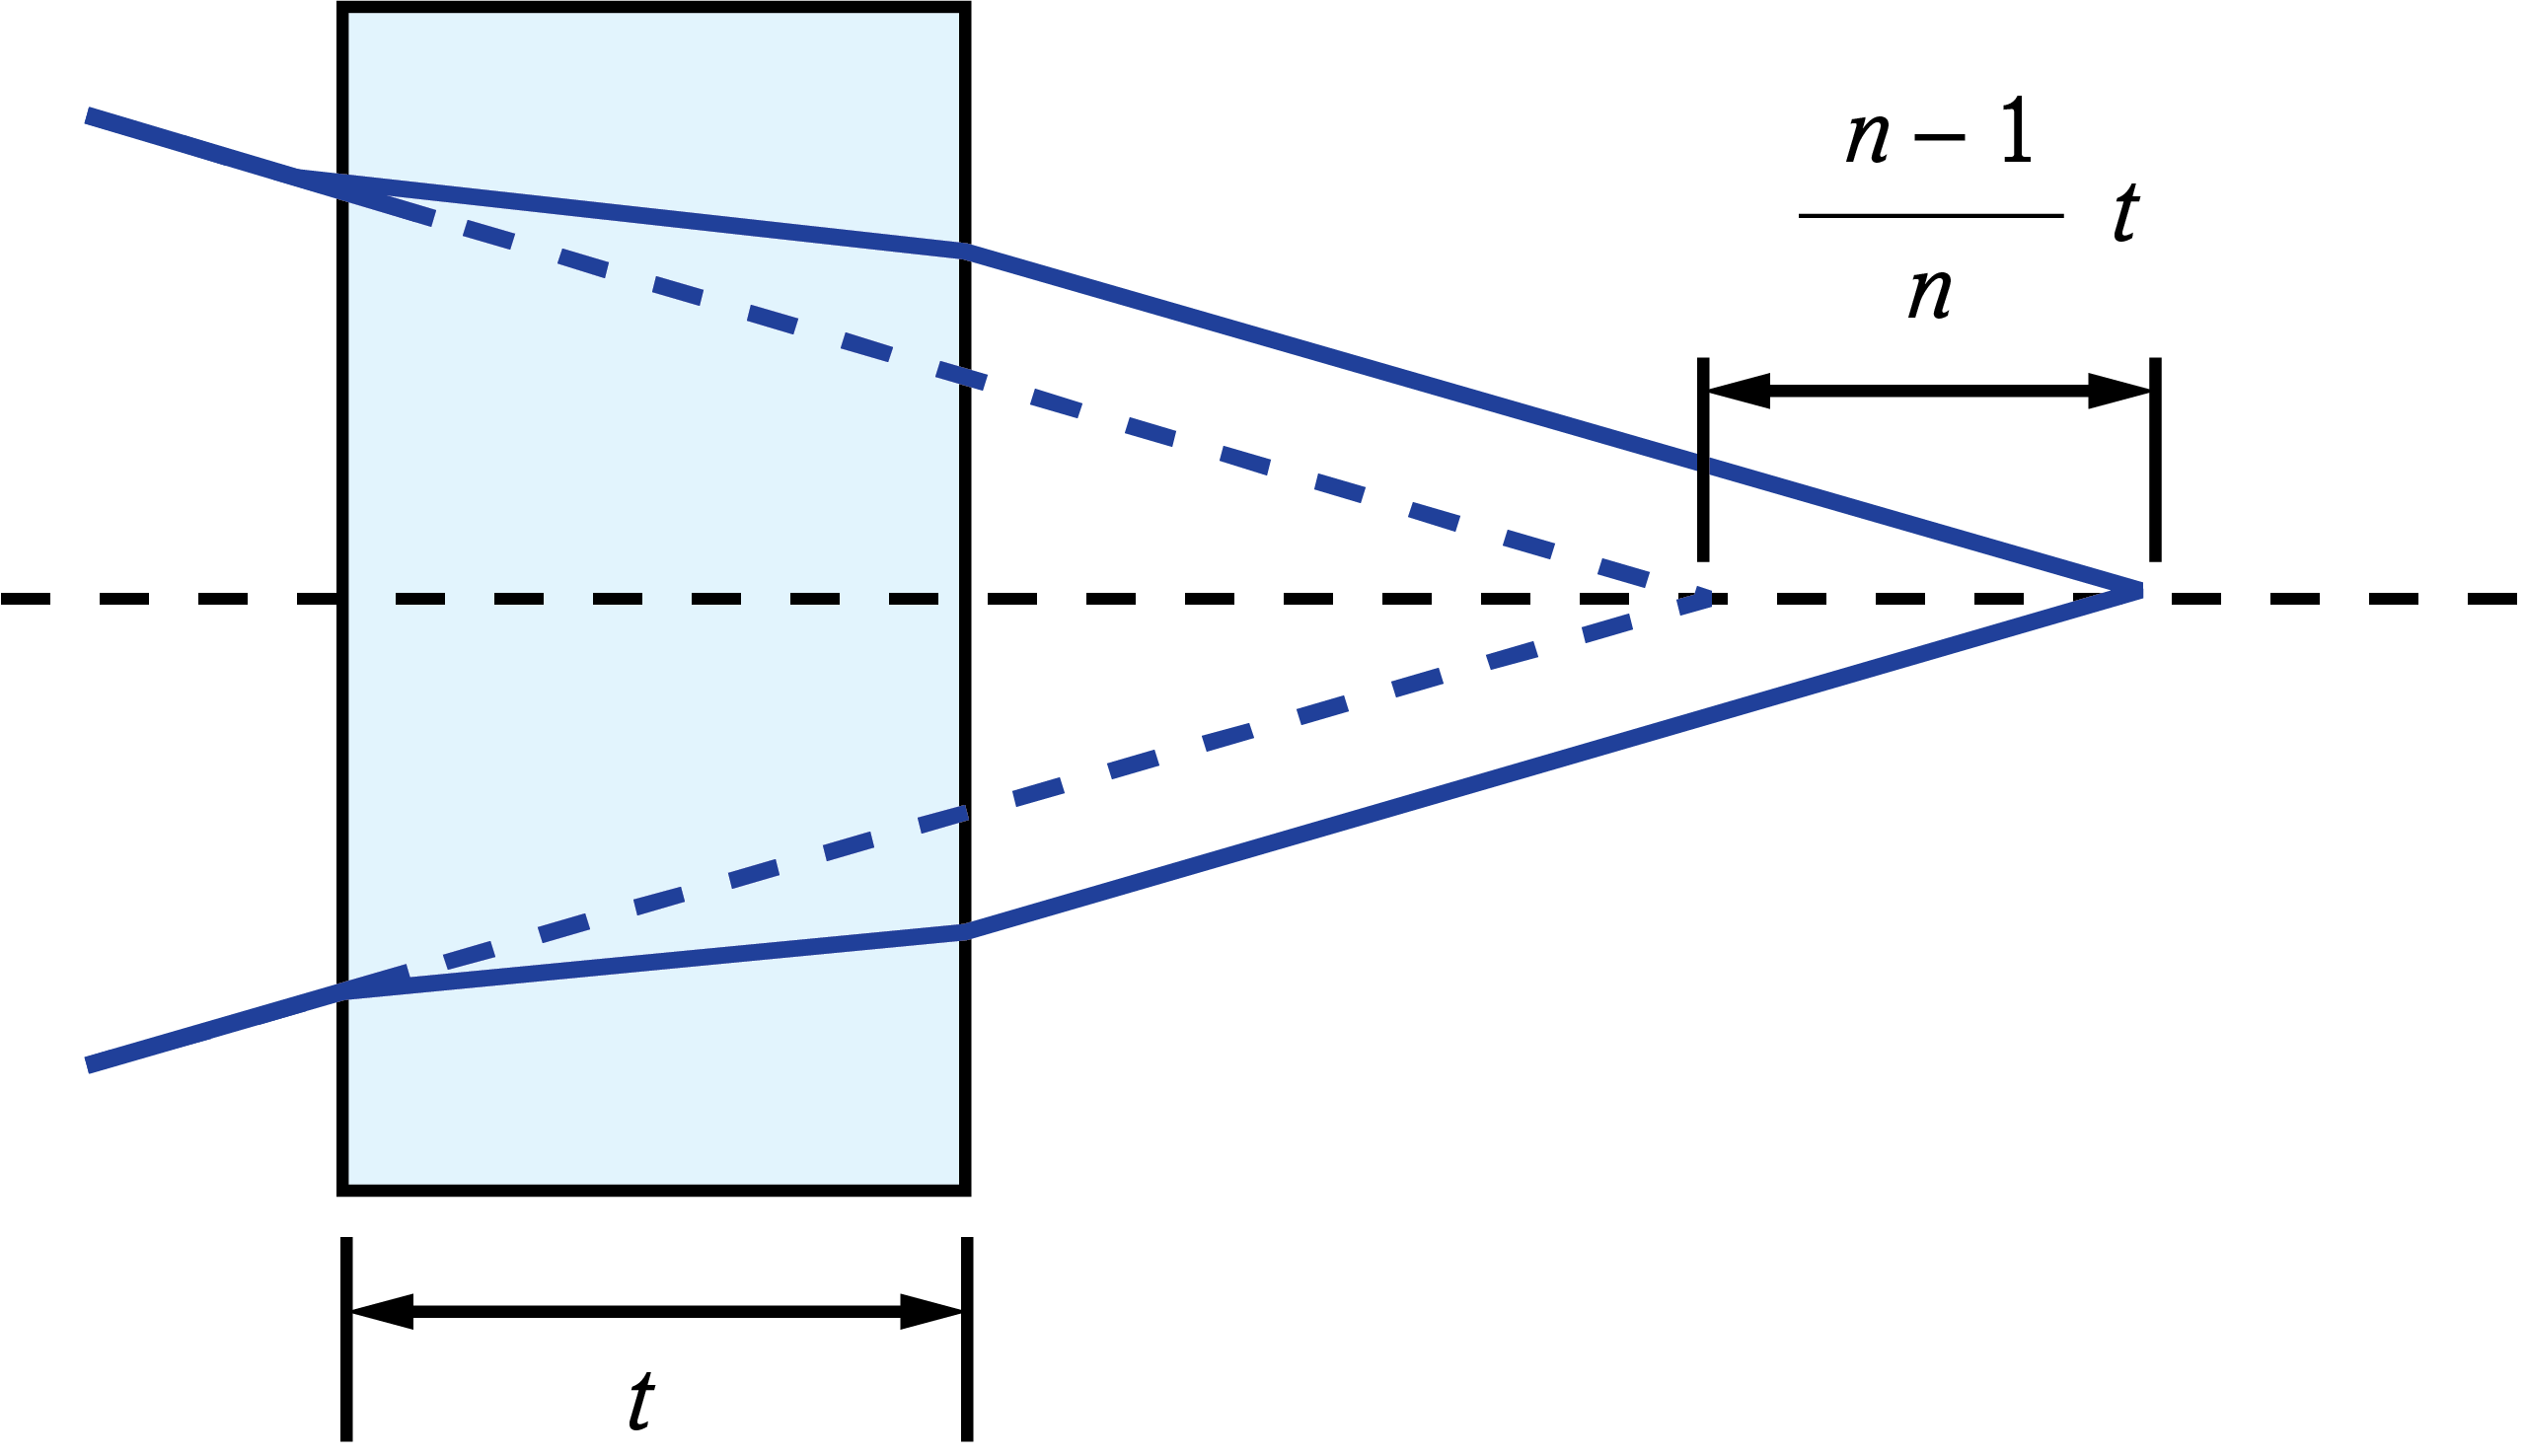 Image shift caused by plane parallel plate